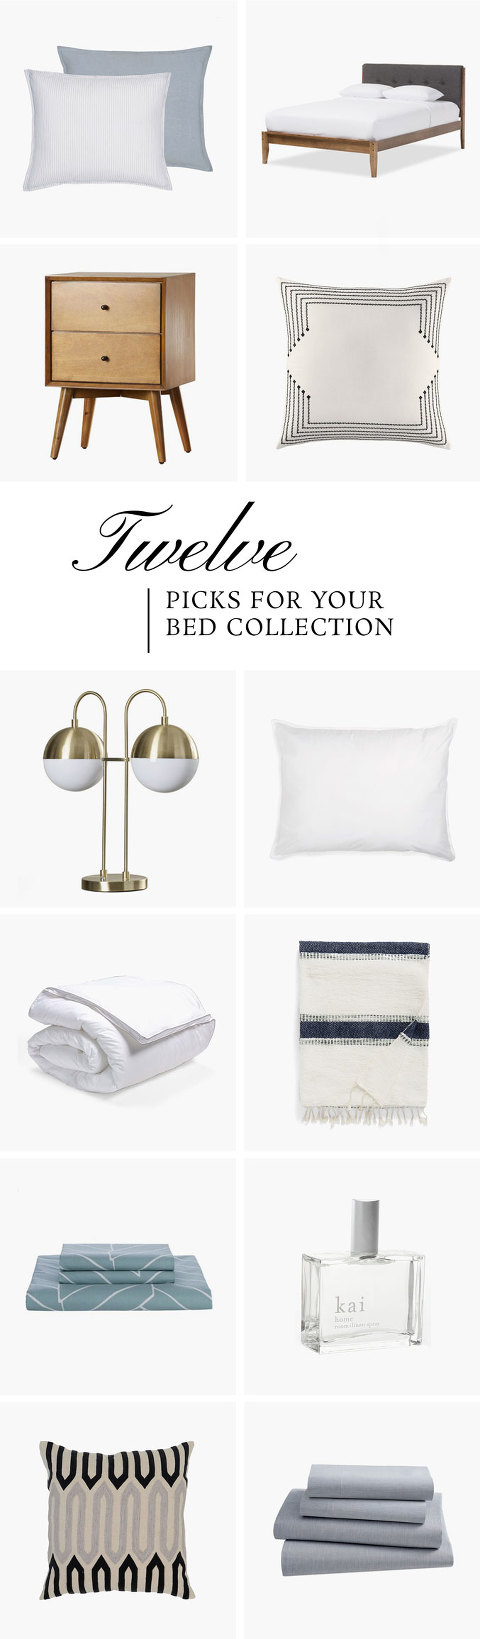 Everything You Need To Make Your Bed This Season | dreamgreendiy.com